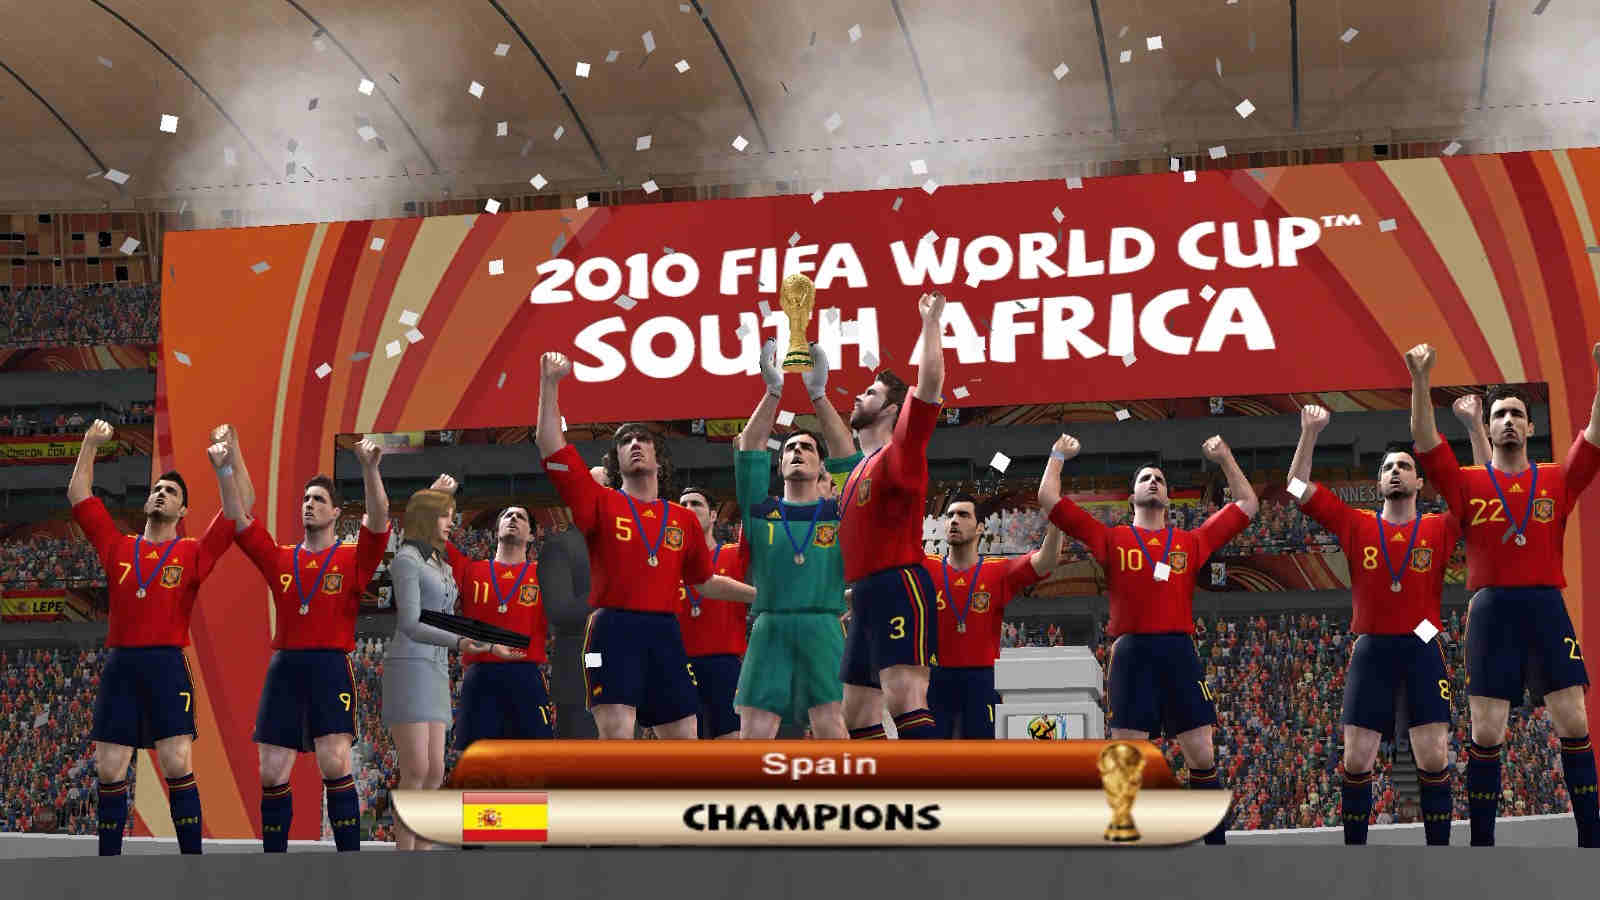 ultigamerz PES 6 FIFA World Cup 2010 Mod